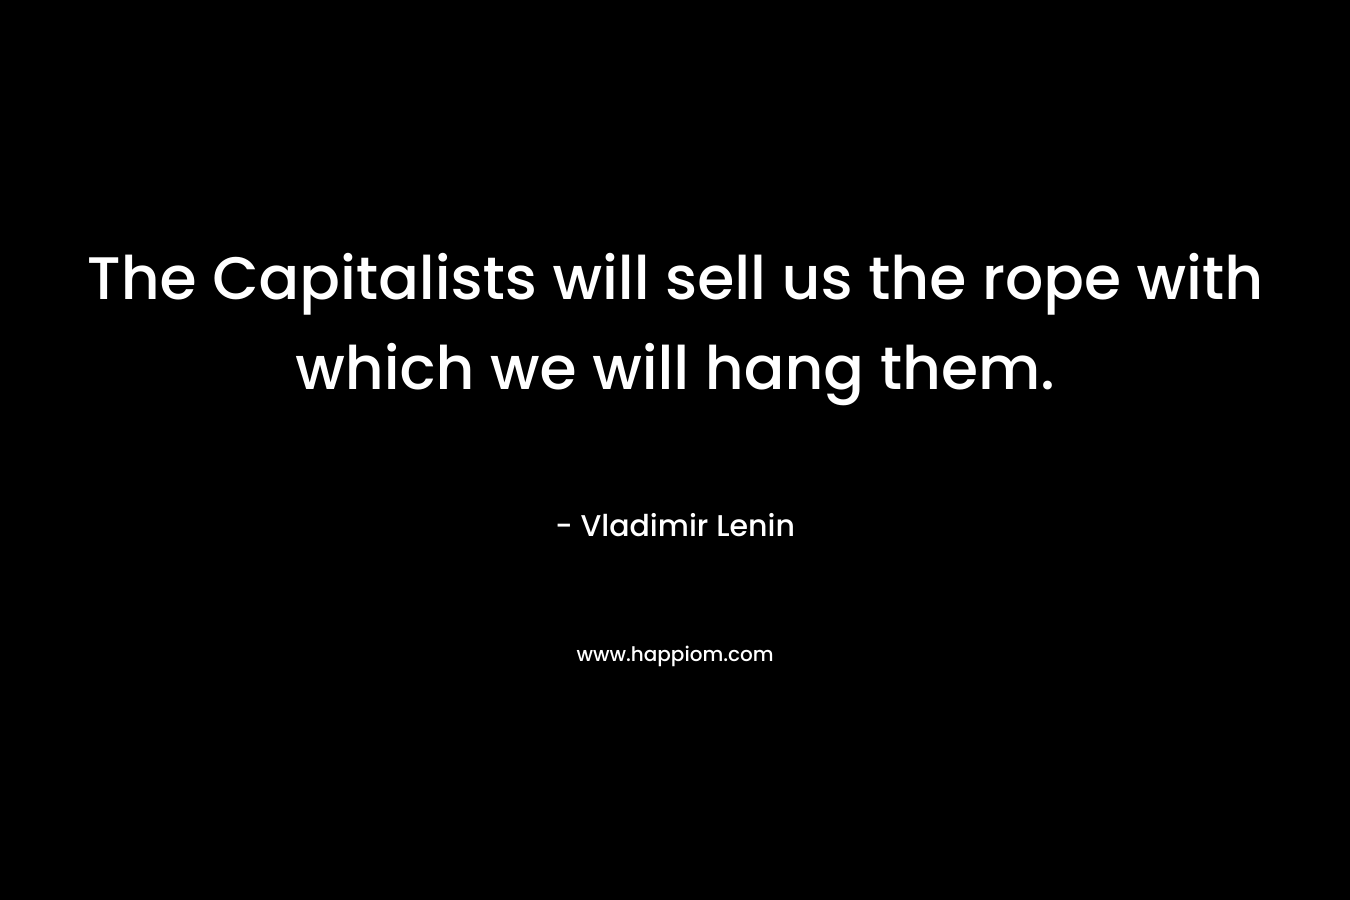 The Capitalists will sell us the rope with which we will hang them.